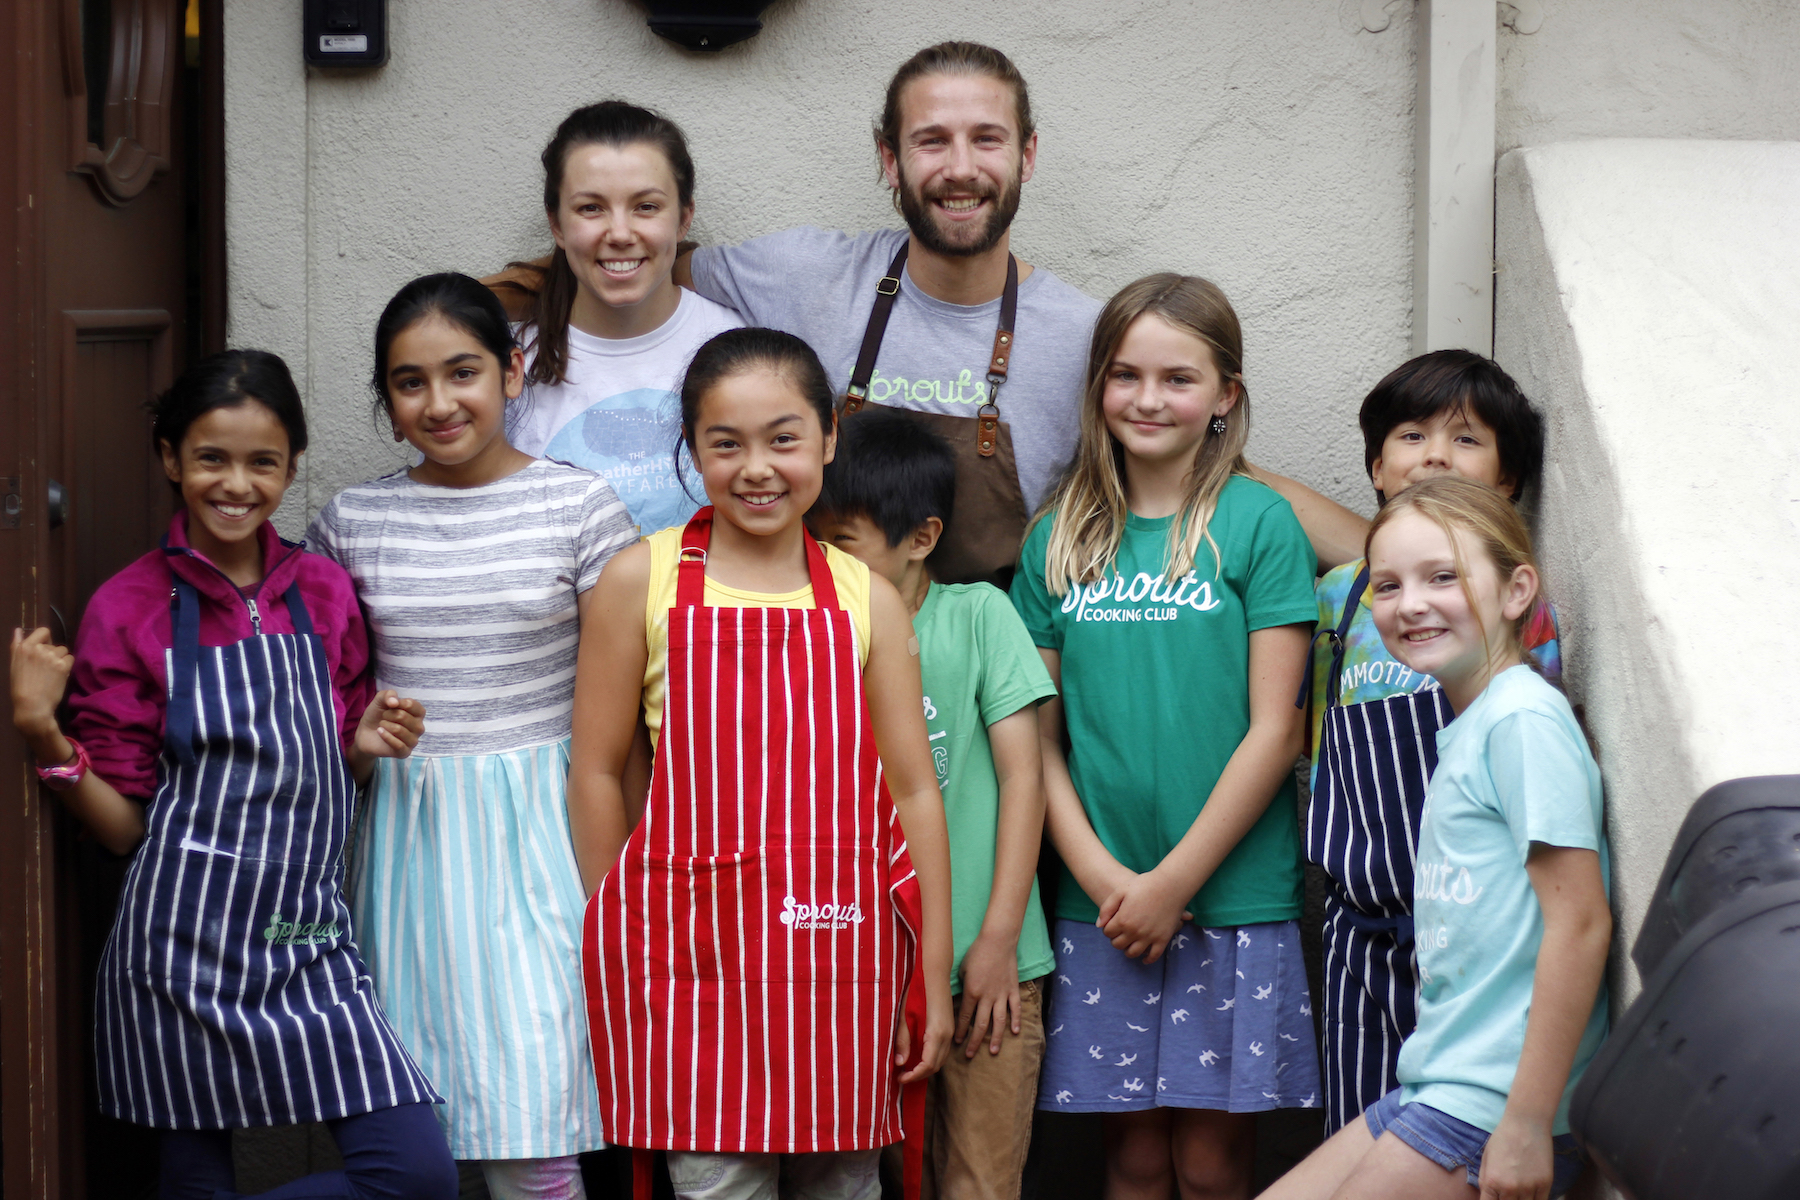 Students at Sprouts Cooking Club learn basic cooking techniques from a team of chefs with diverse backgrounds and philosophies.